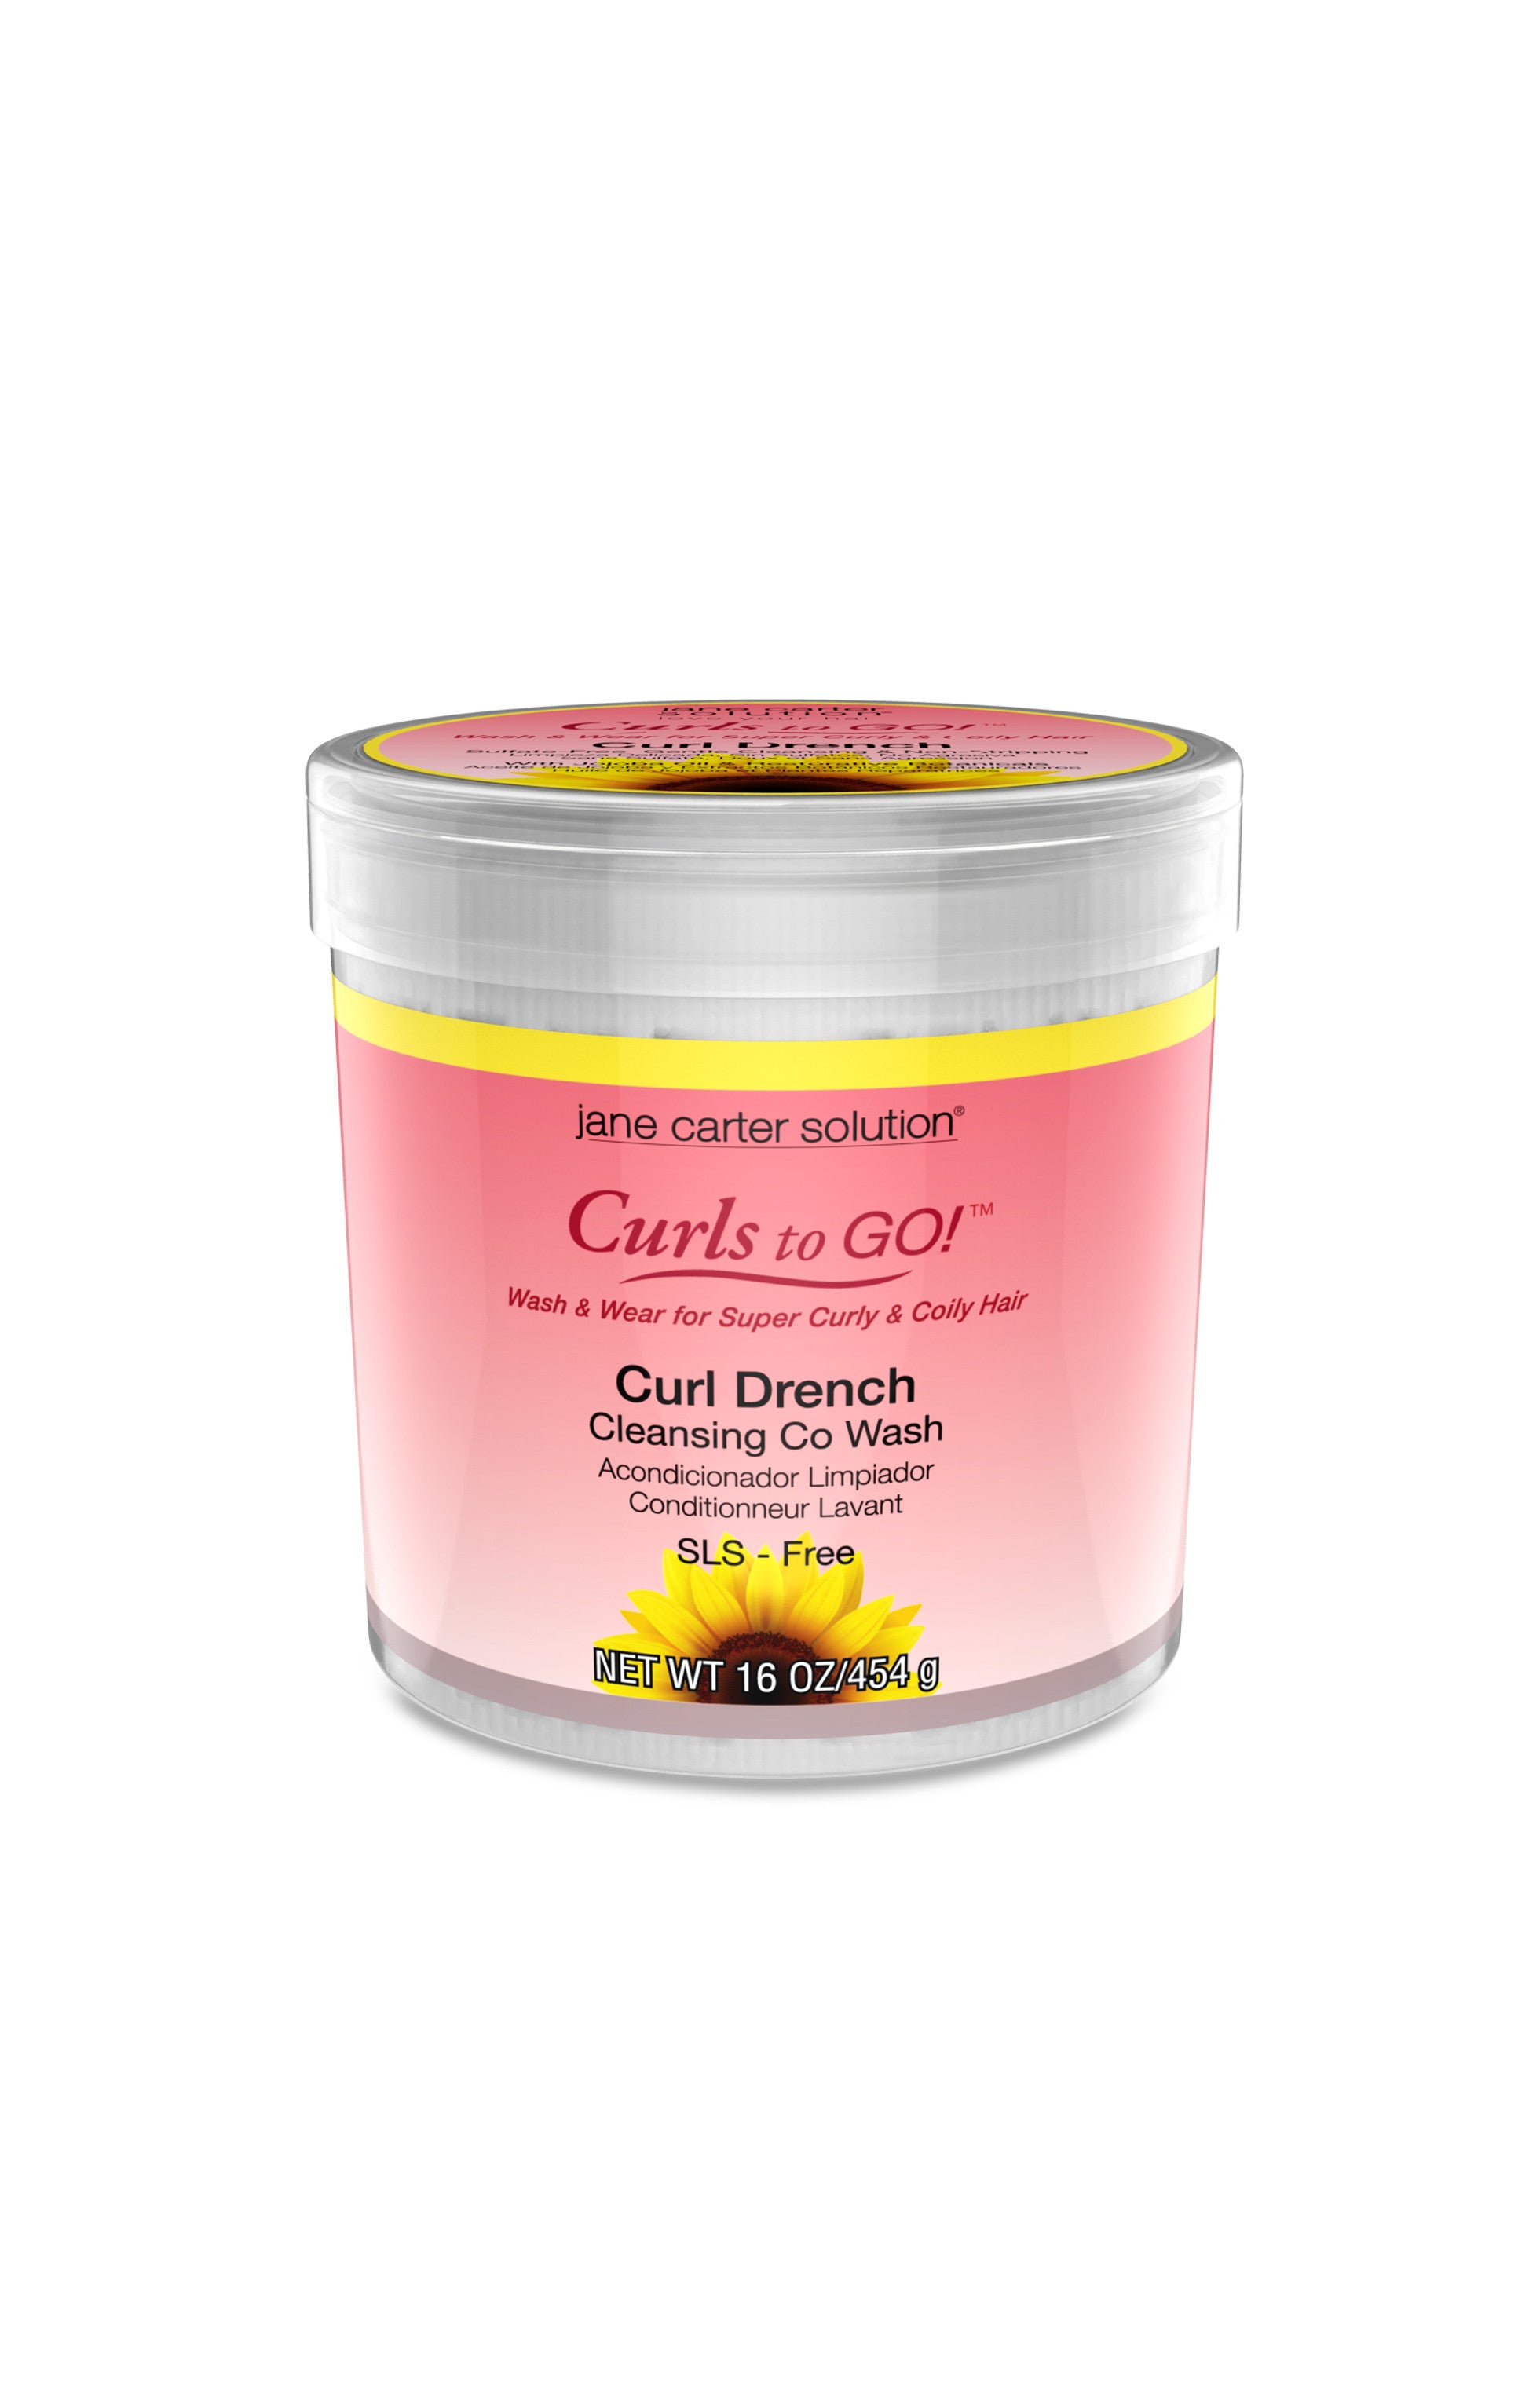 Jane Carter Solution Curl Drench Cleansing Co-Wash (16oz) - Hydrating, Nourishing, Reduce Frizz (Curl Drench)